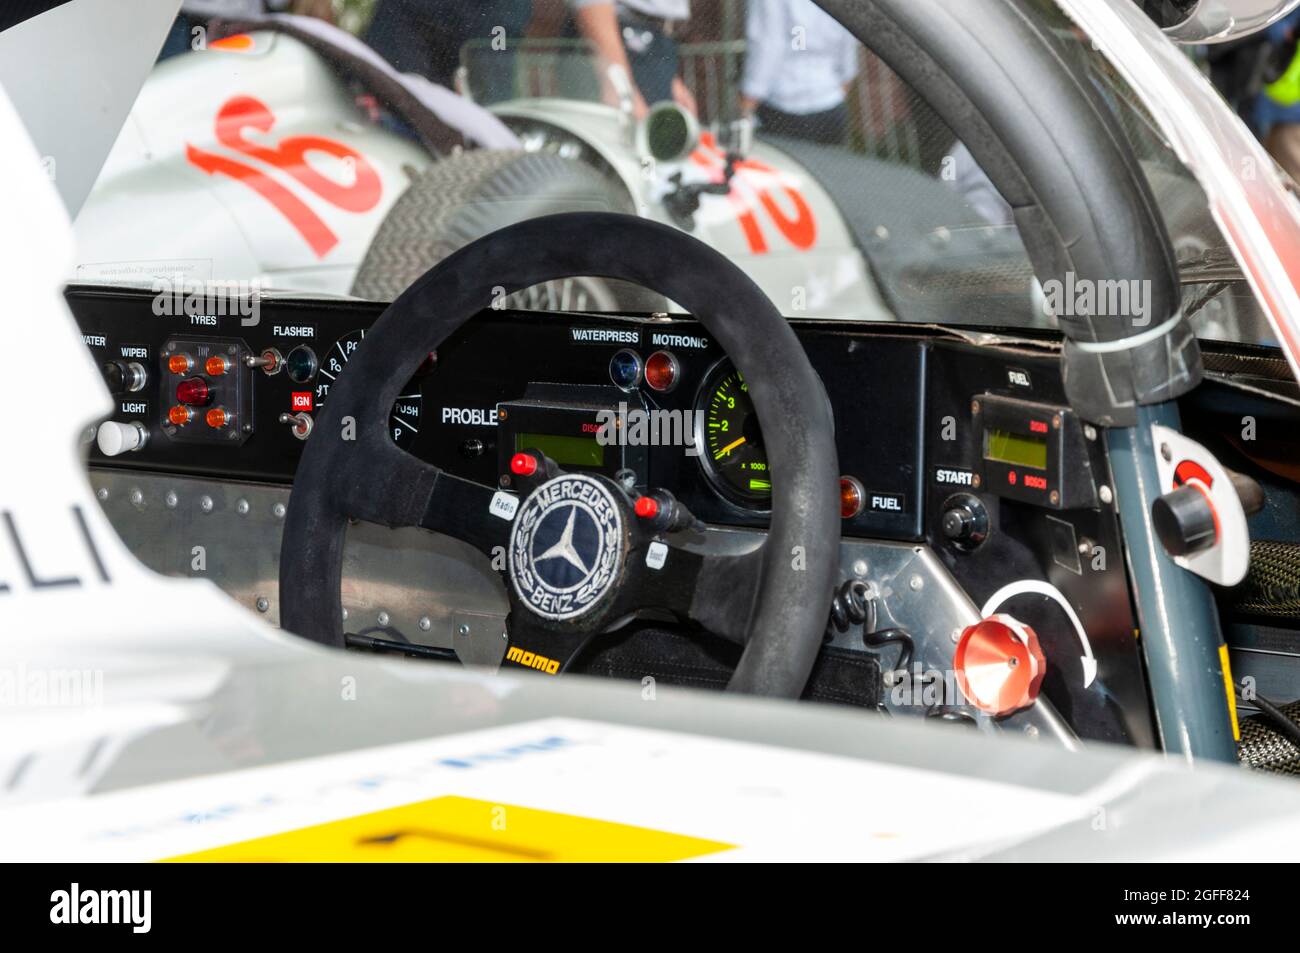 Inside the cockpit of a Sauber built Mercedes Benz C11 Group C sports prototype endurance racing car. Steering wheel, switches, read-outs Stock Photo